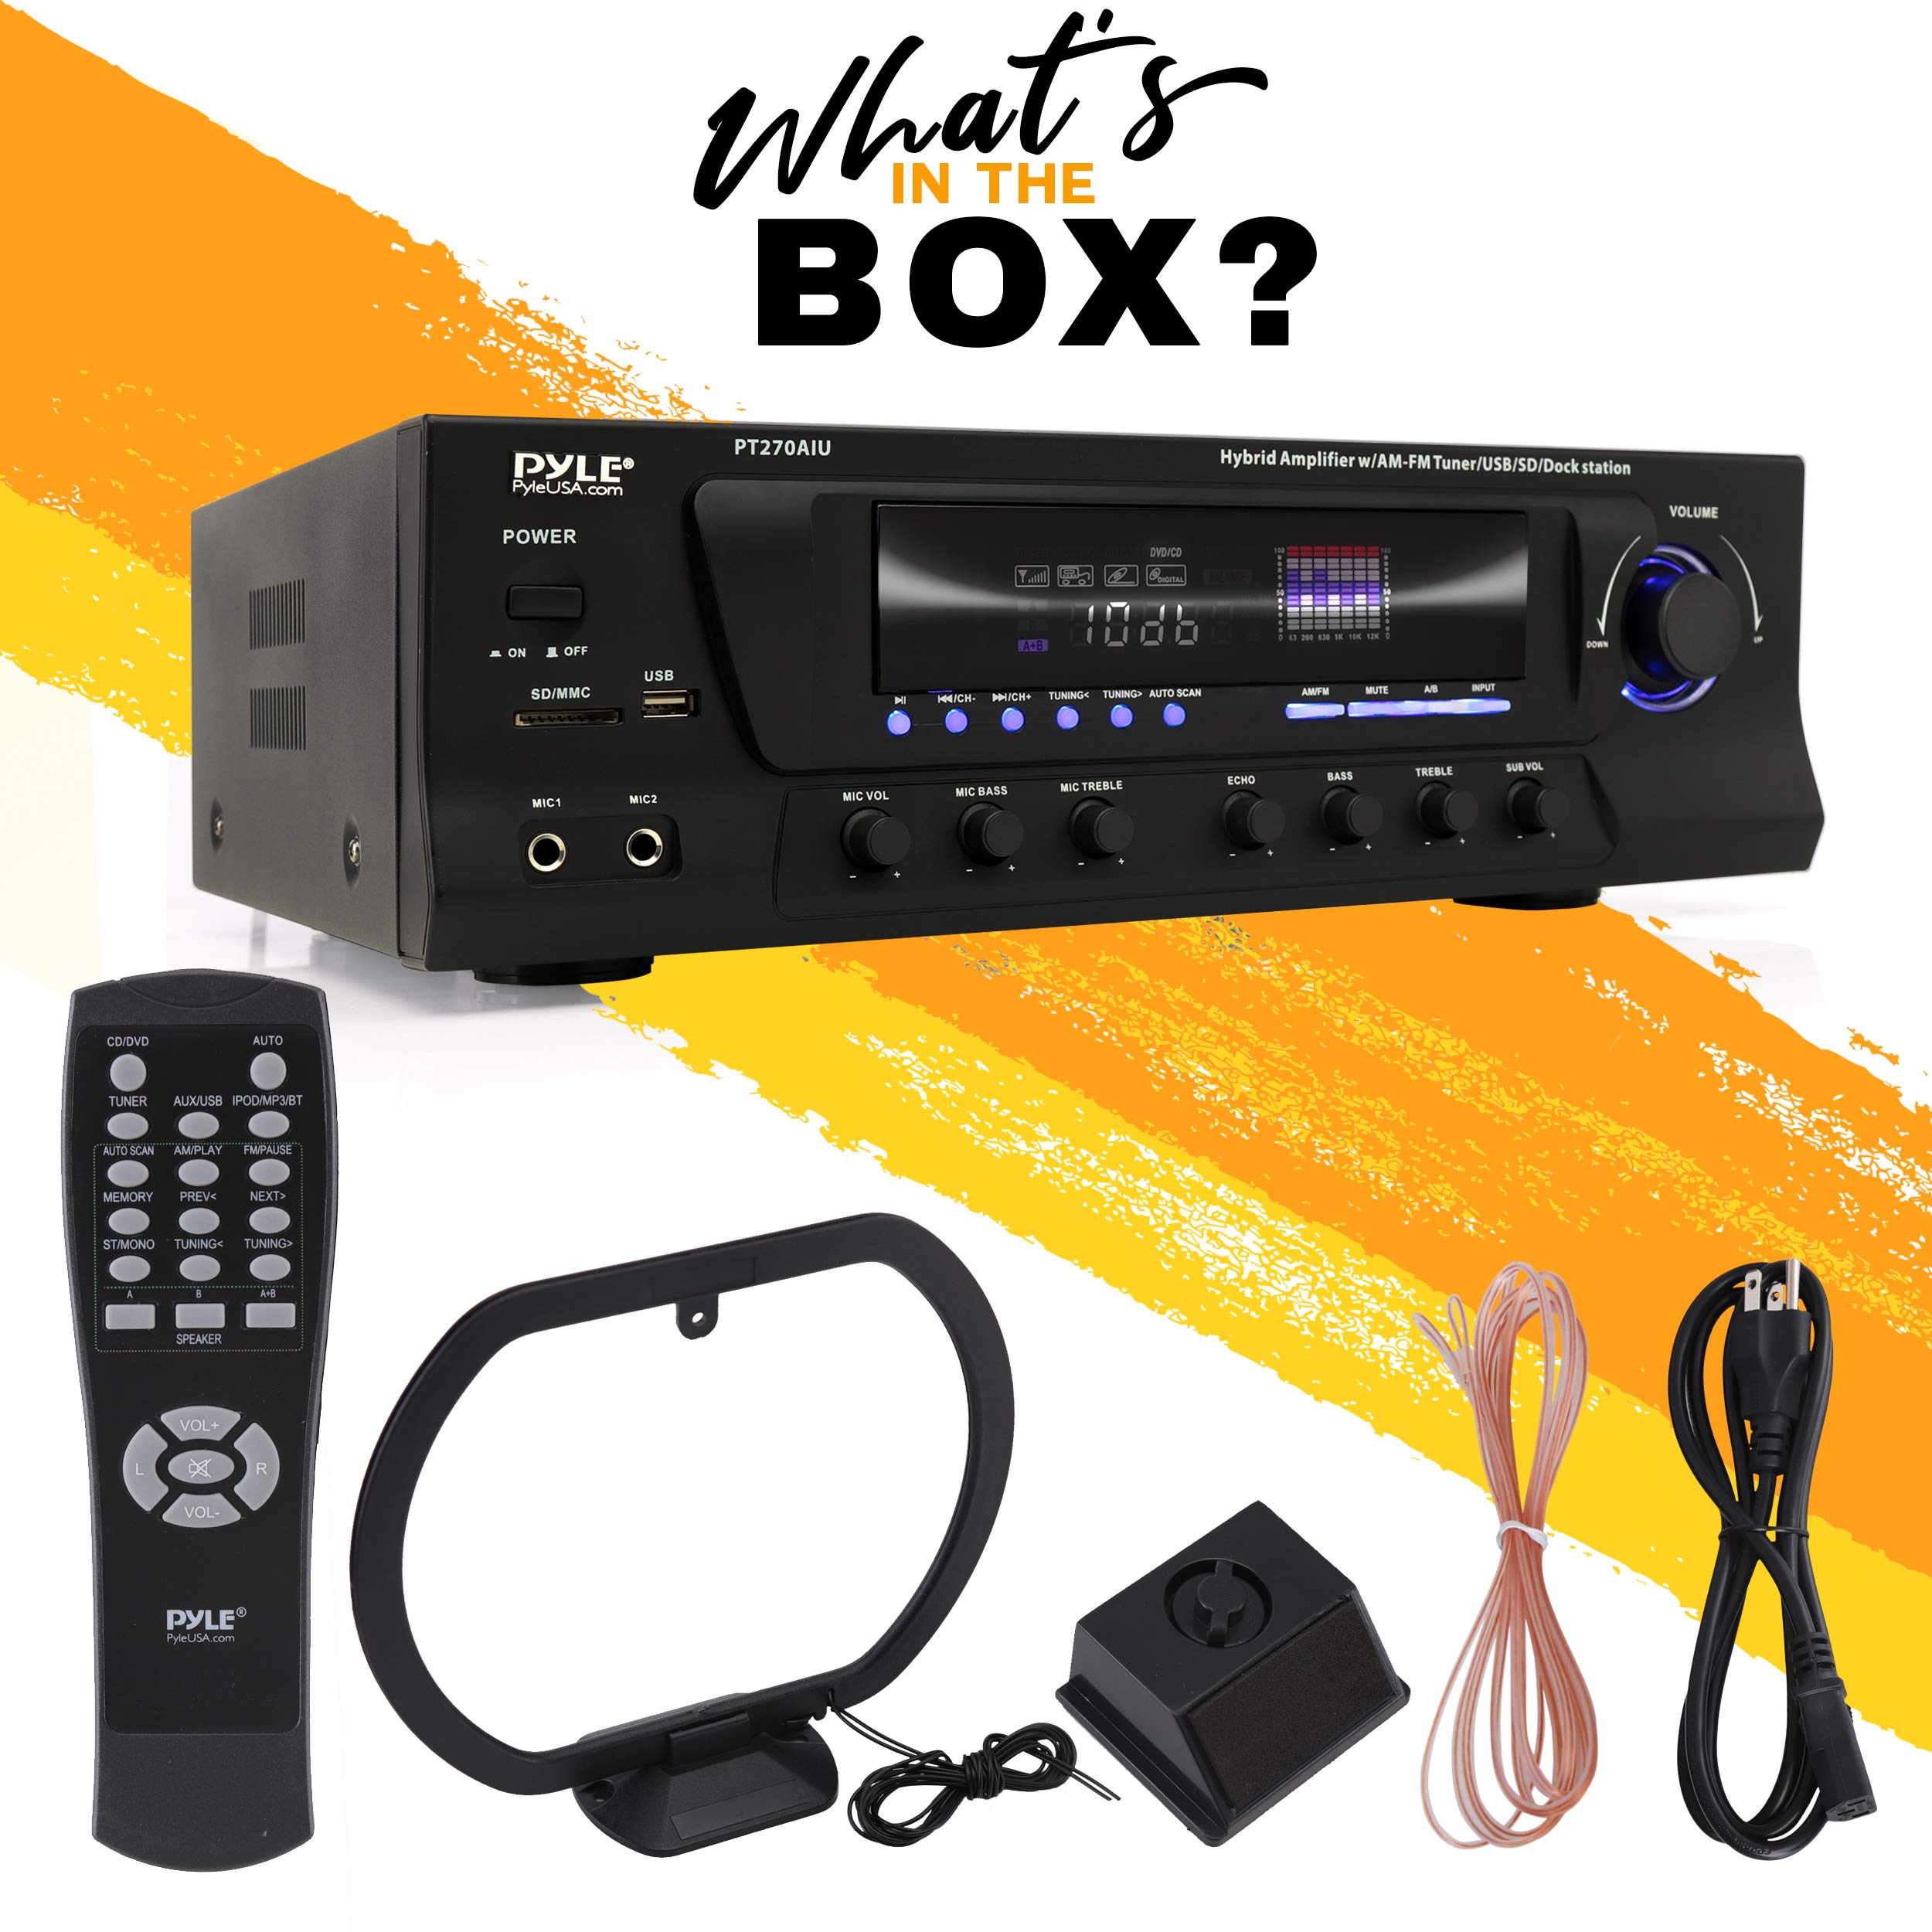 Pyle 300W Digital Stereo Receiver System - AM/FM Qtz. Synthesized Tuner, USB/SD Card MP3 Player & Subwoofer Control, A/B Speaker, iPod/MP3 Input w/Karaoke, Cable & Remote Sensor - Pyle PT270AIU.5